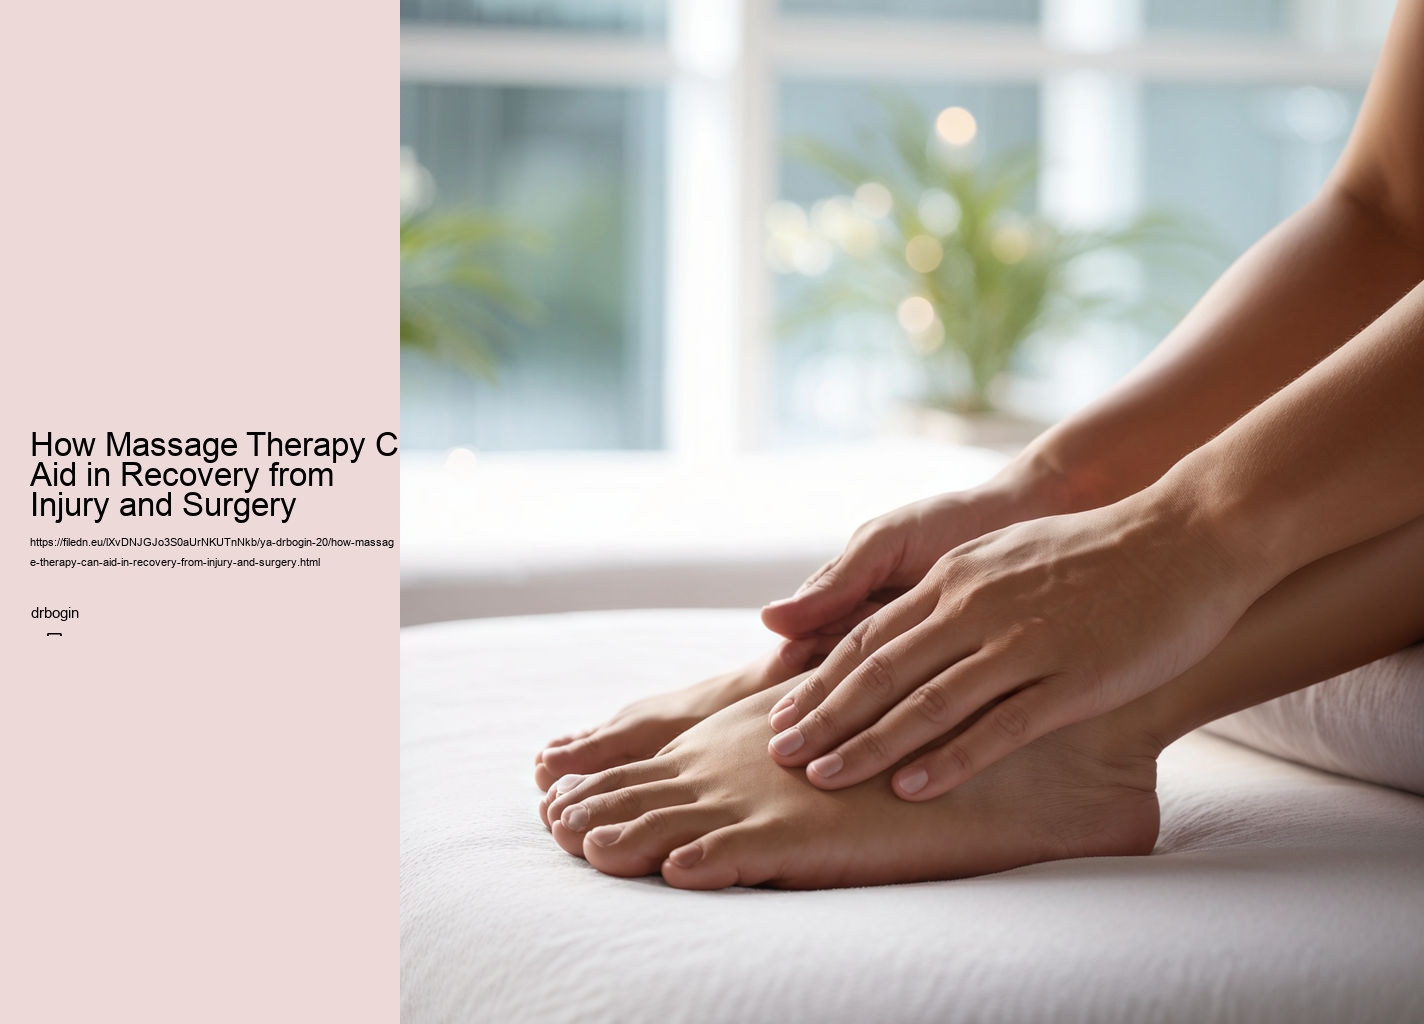 How Massage Therapy Can Aid in Recovery from Injury and Surgery